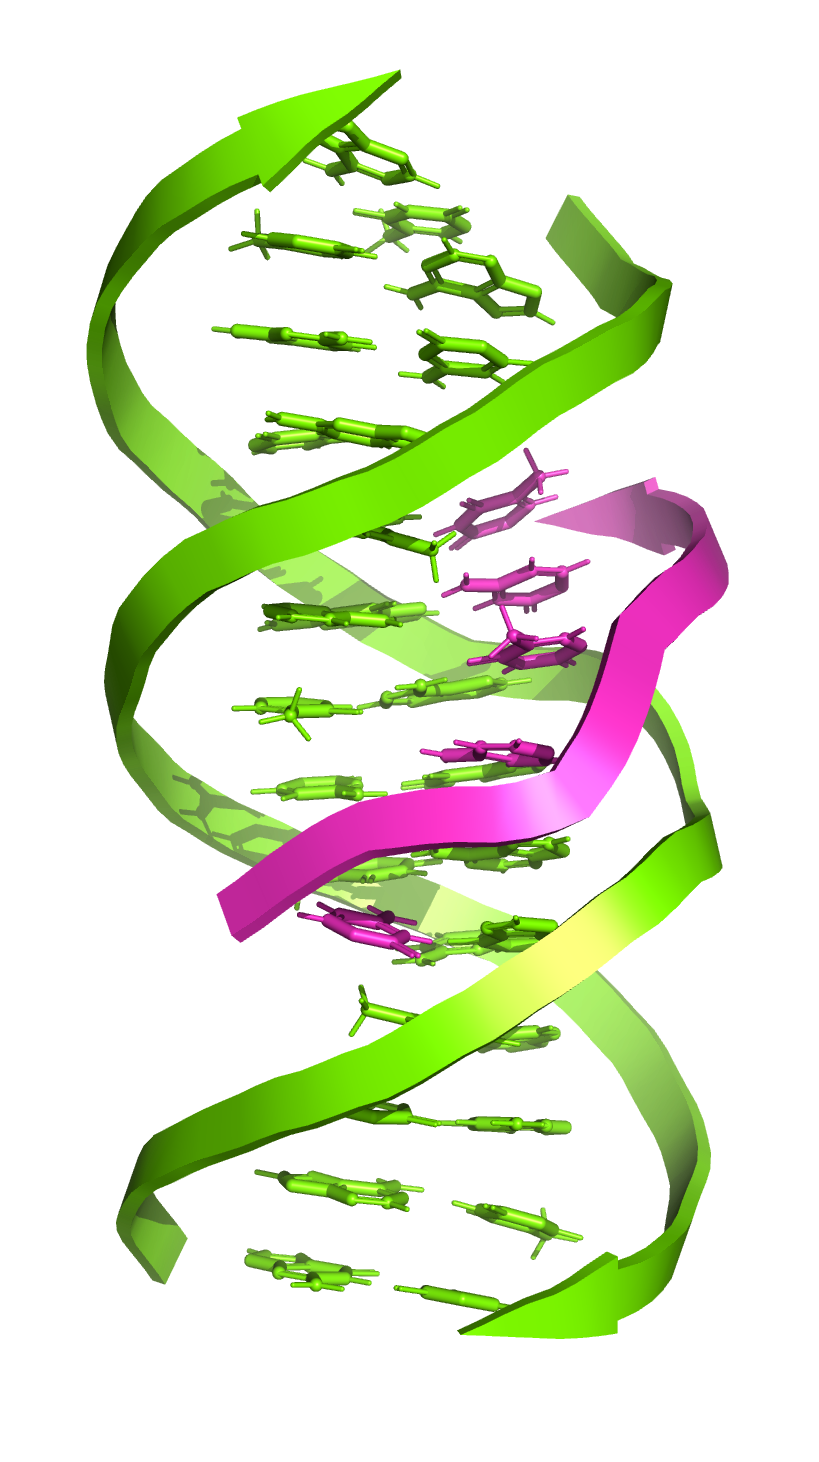 Fig. 1: DNA triplex helix is an interaction between double-stranded DNA and an oligonucleotide. Source: Triple helix https://en.wikipedia.org/wiki/Triple-stranded_DNA.